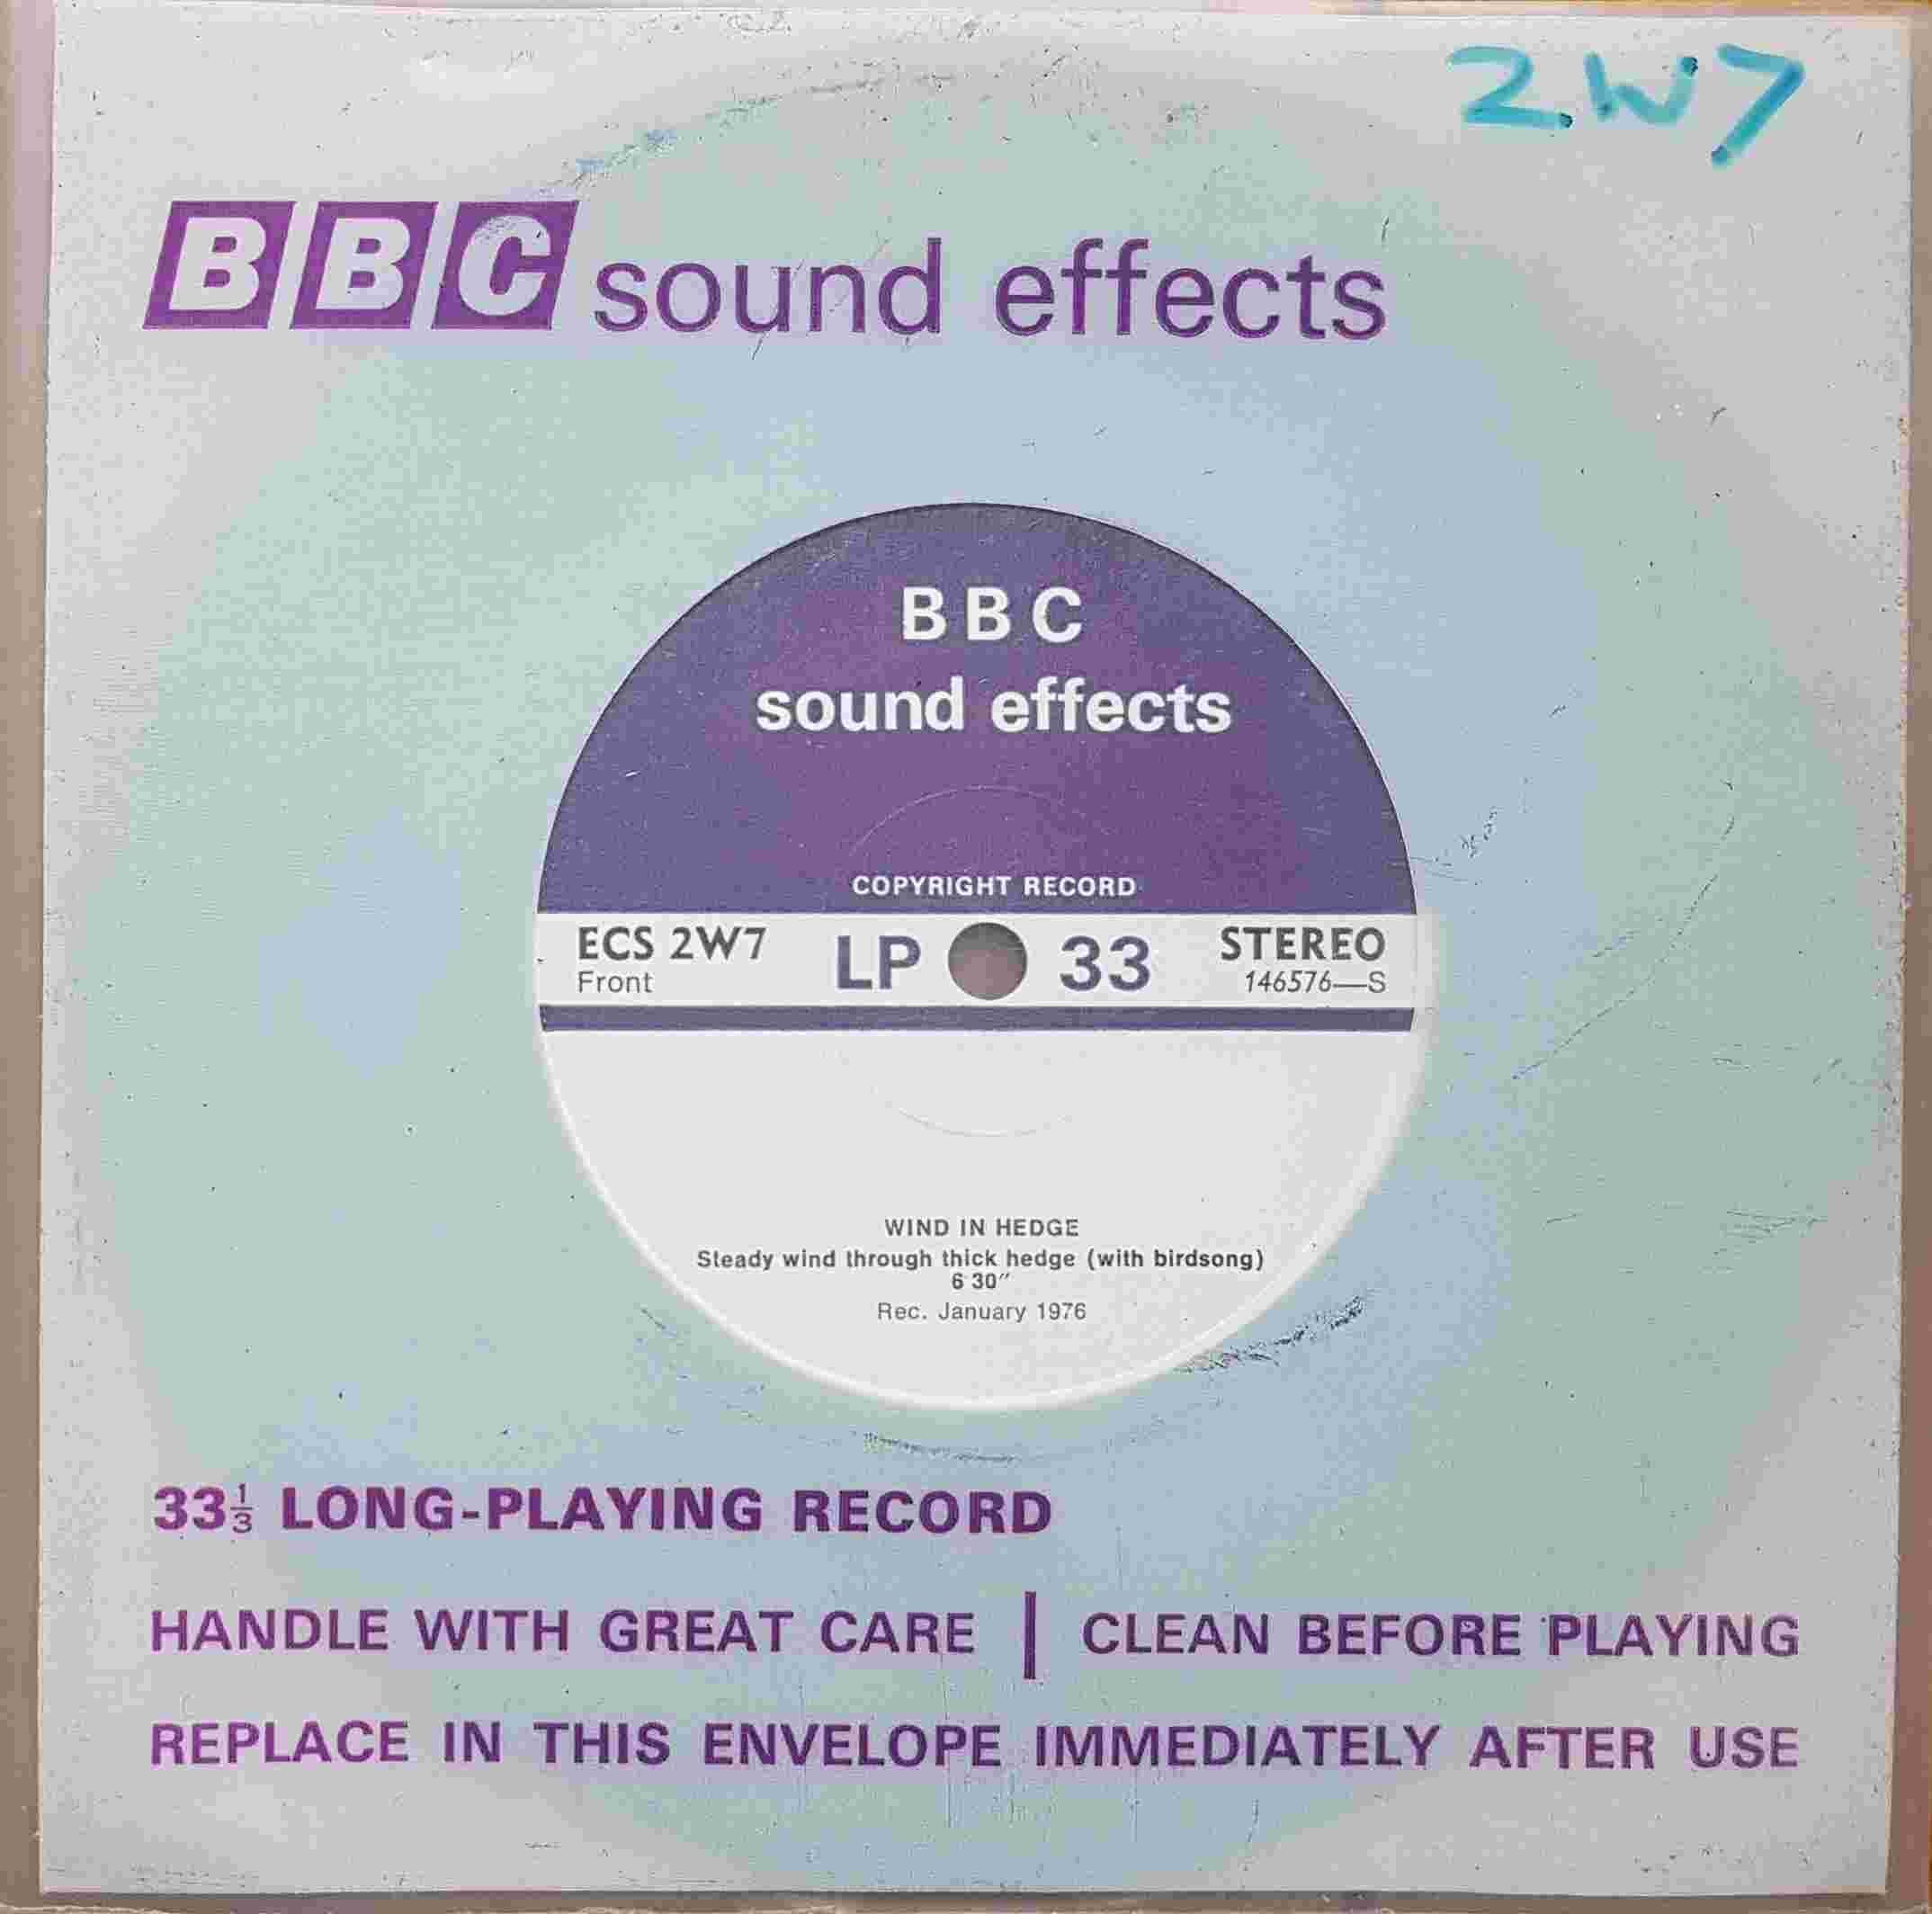 Picture of ECS 2W7 Wind in hedge / Wind in bushes by artist Not registered from the BBC singles - Records and Tapes library